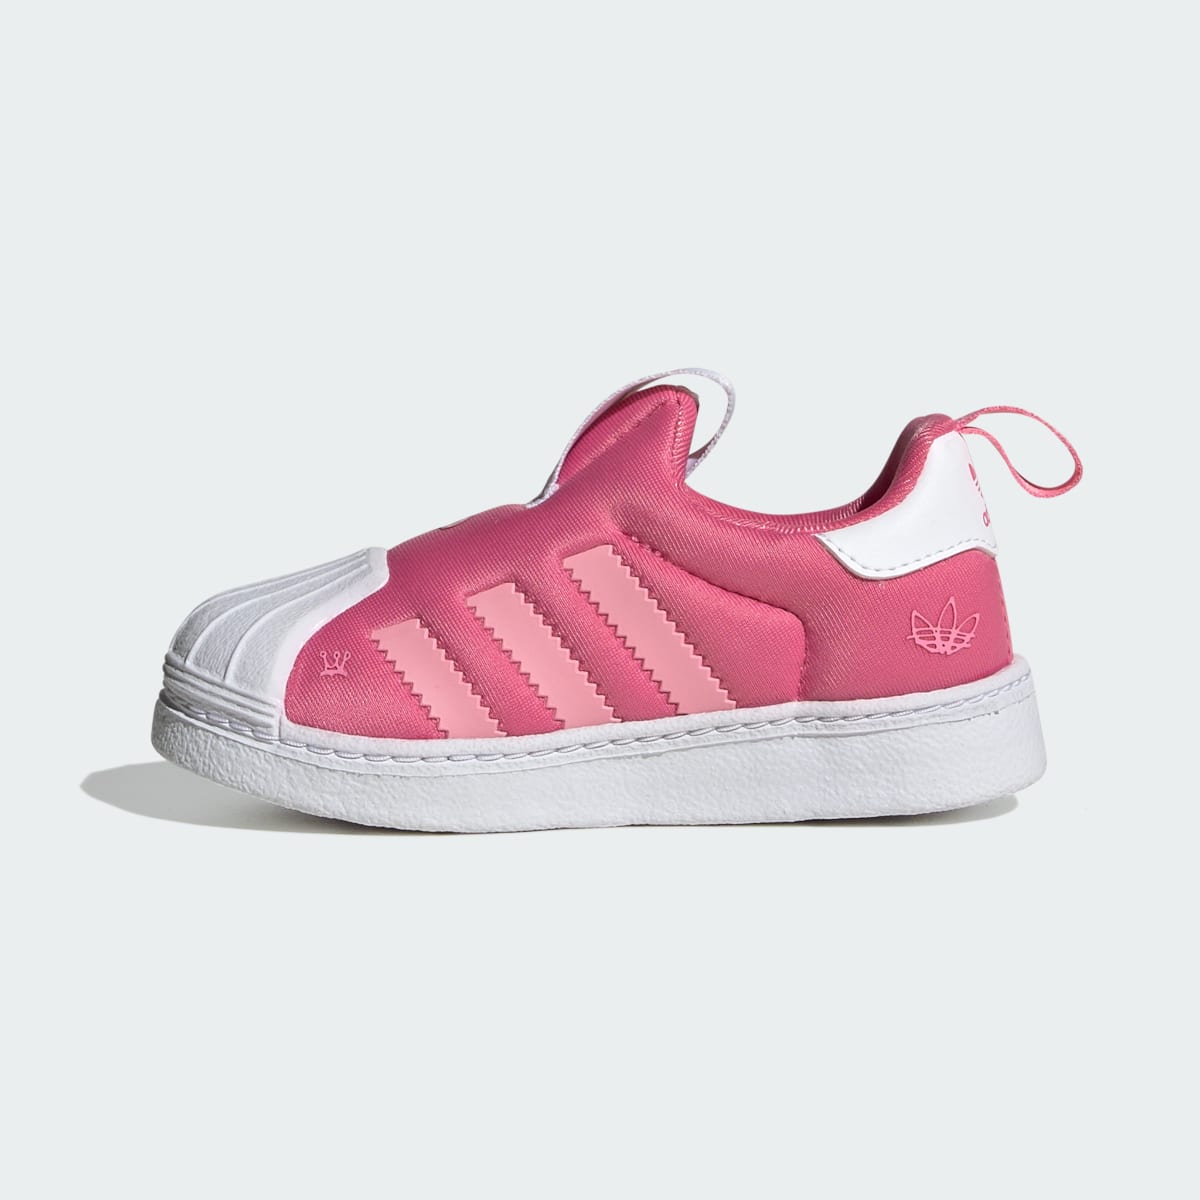 Adidas Originals x Hello Kitty and Friends Superstar 360 Shoes Kids. 7